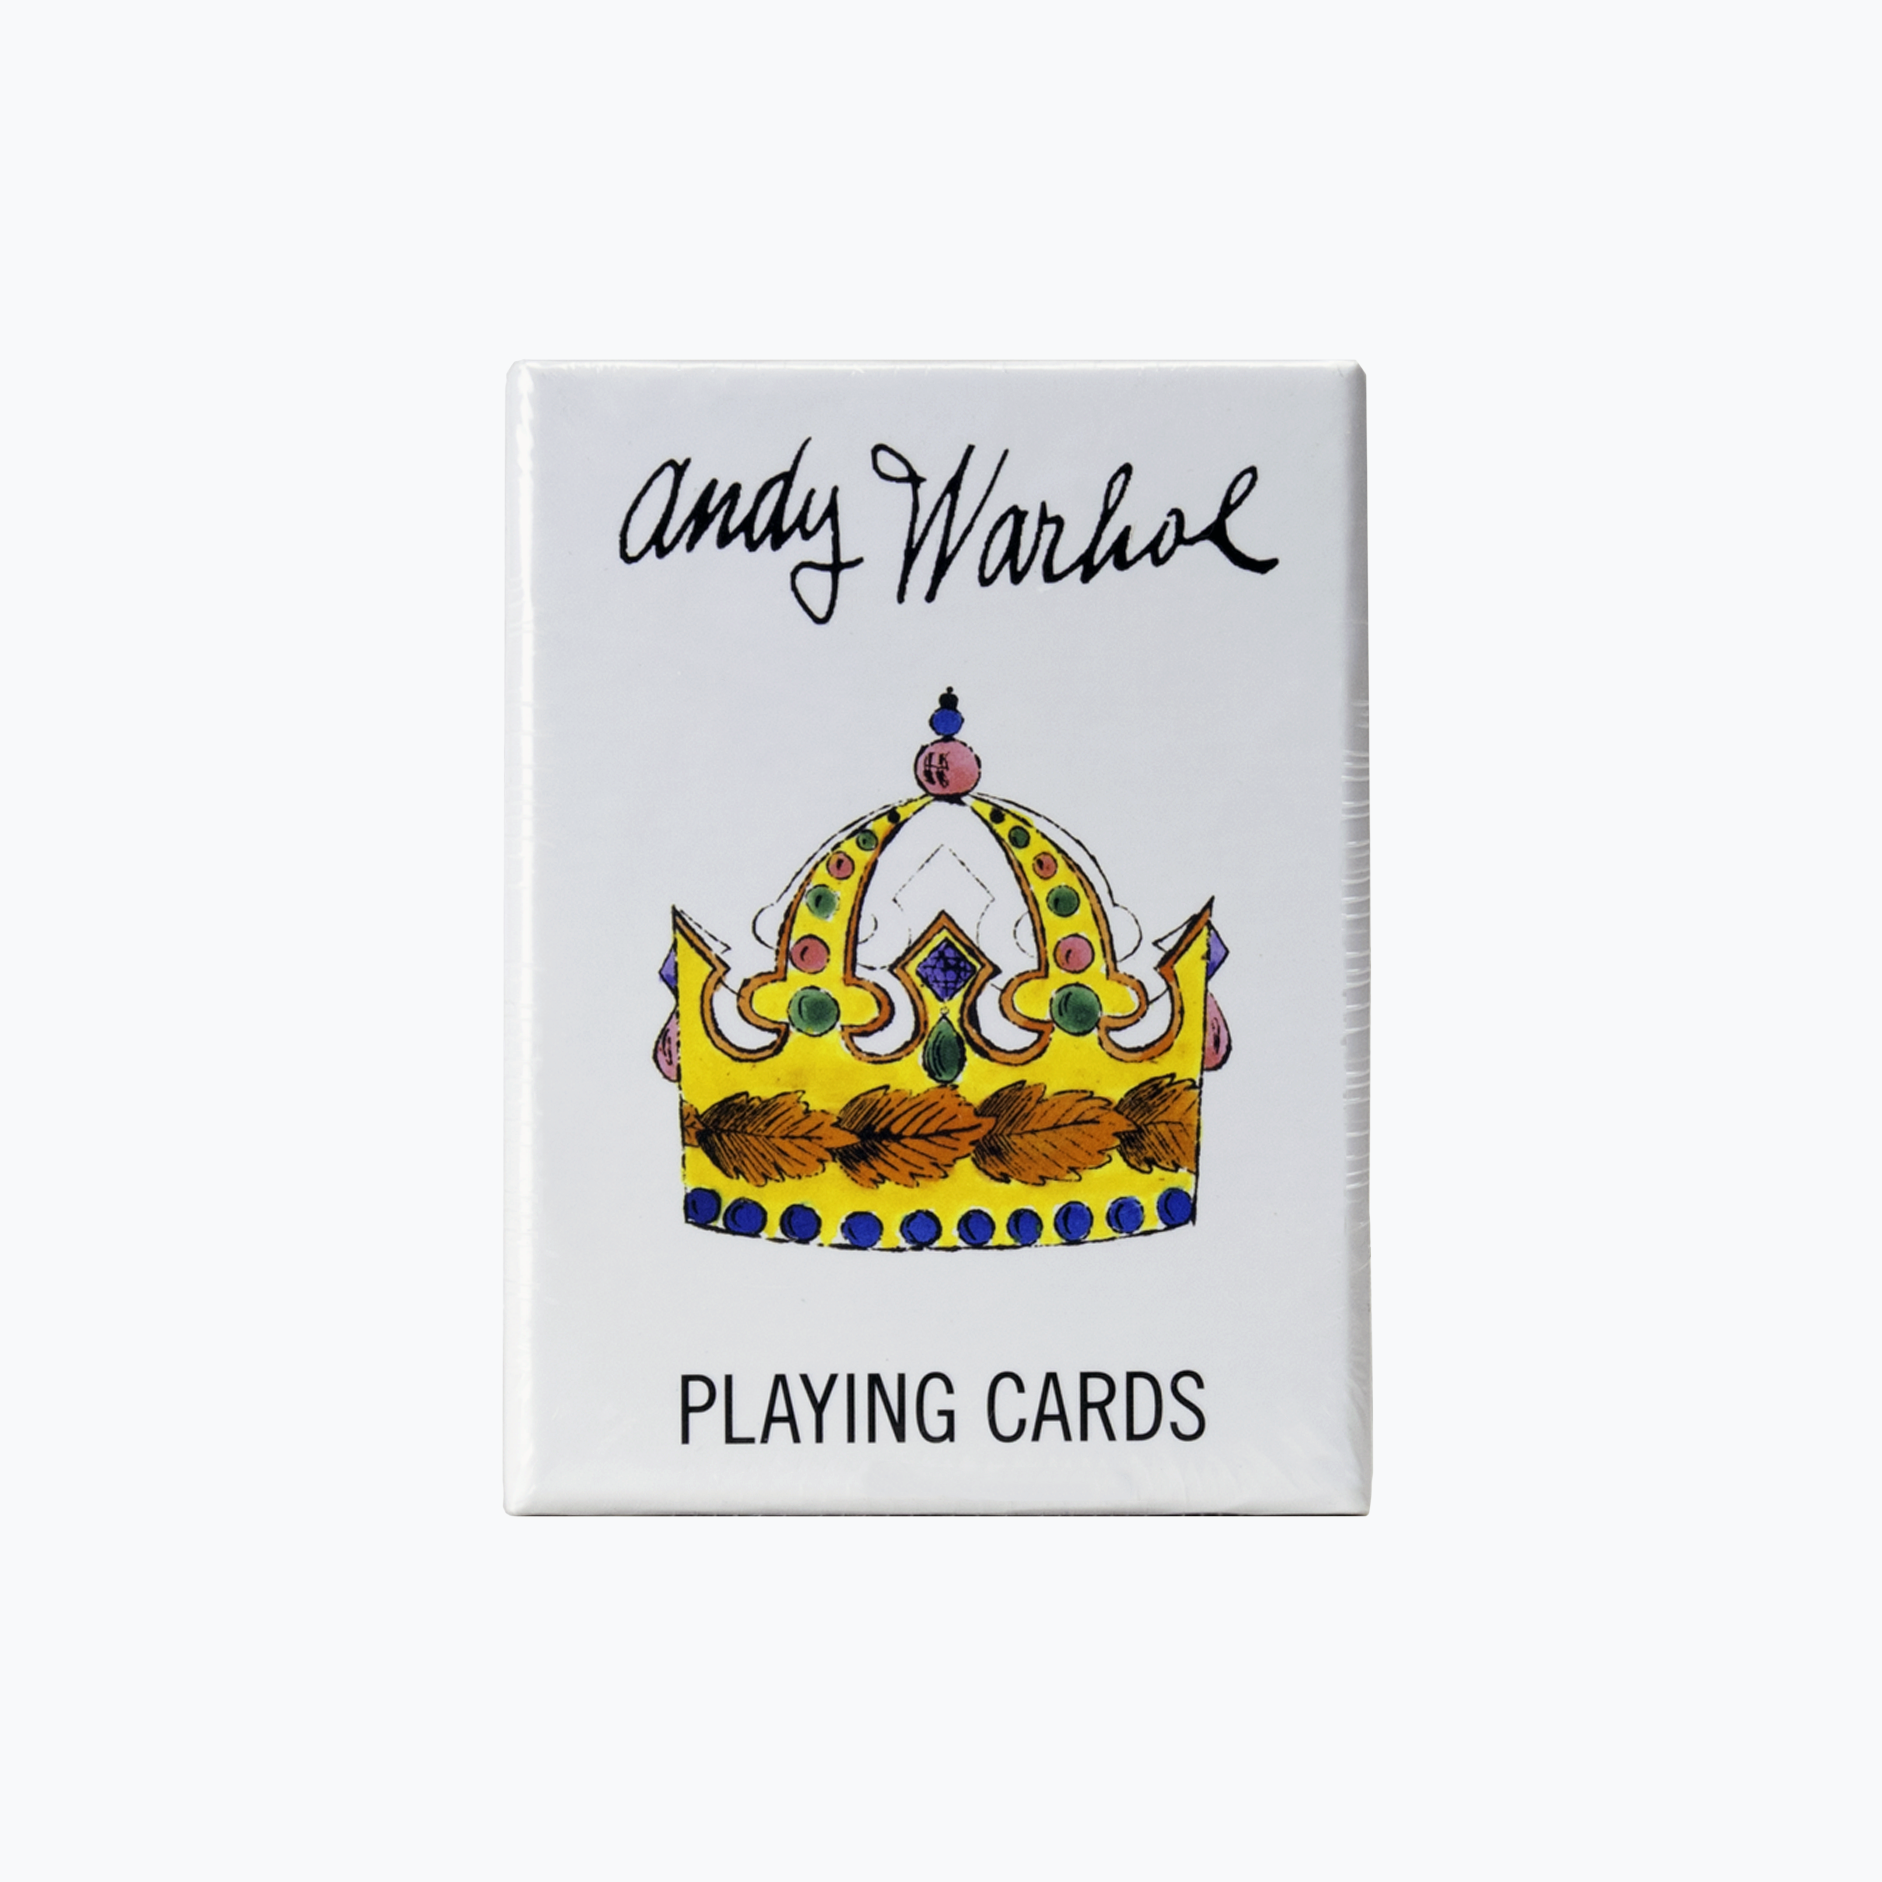 Andy Warhol - Playing Cards